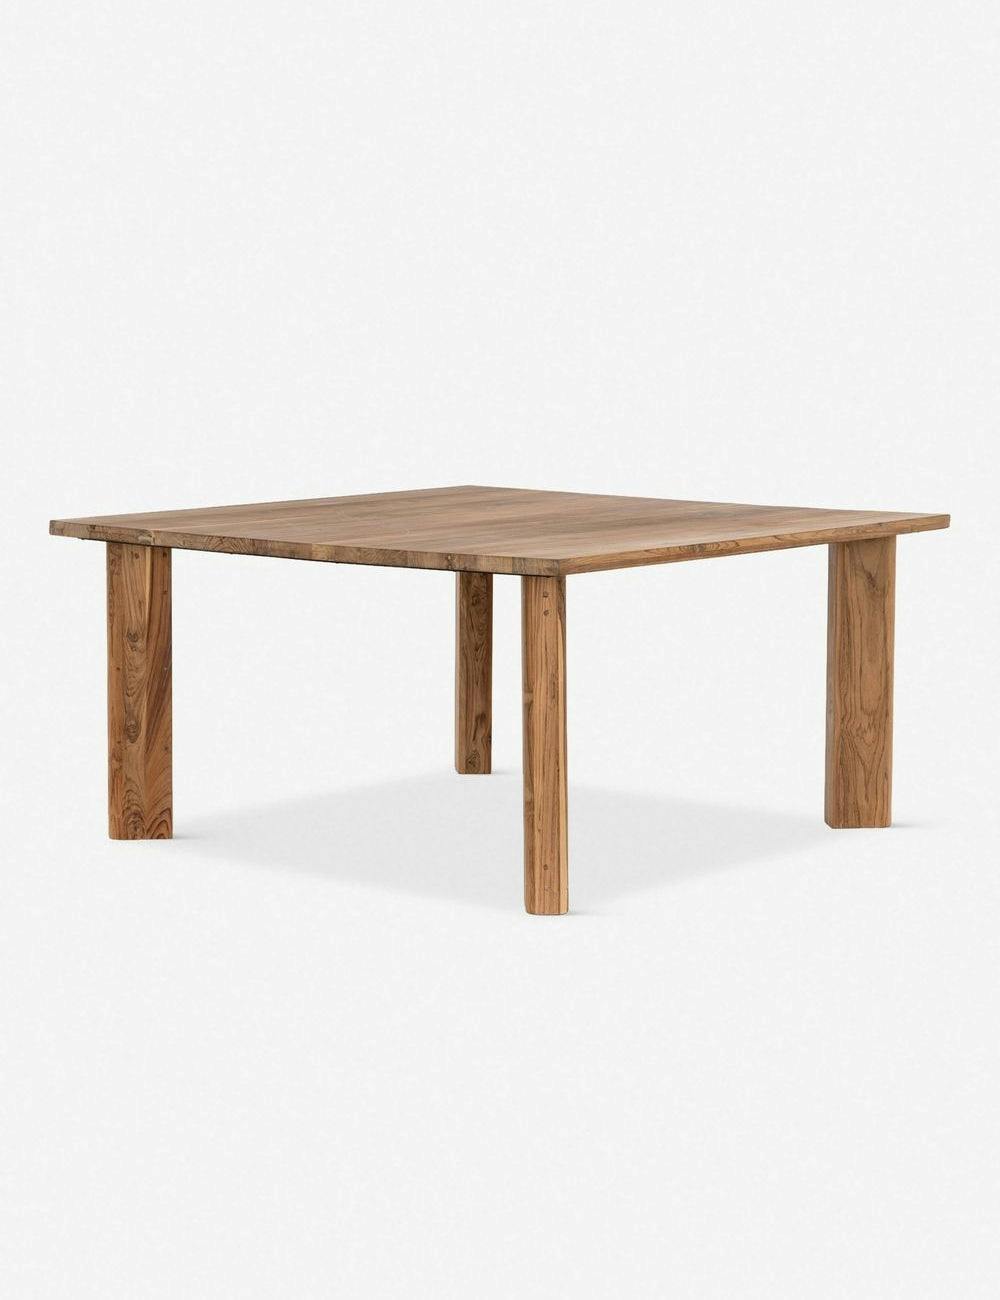 Modern Merritt Square Reclaimed Teak Dining Table with Marble Accent